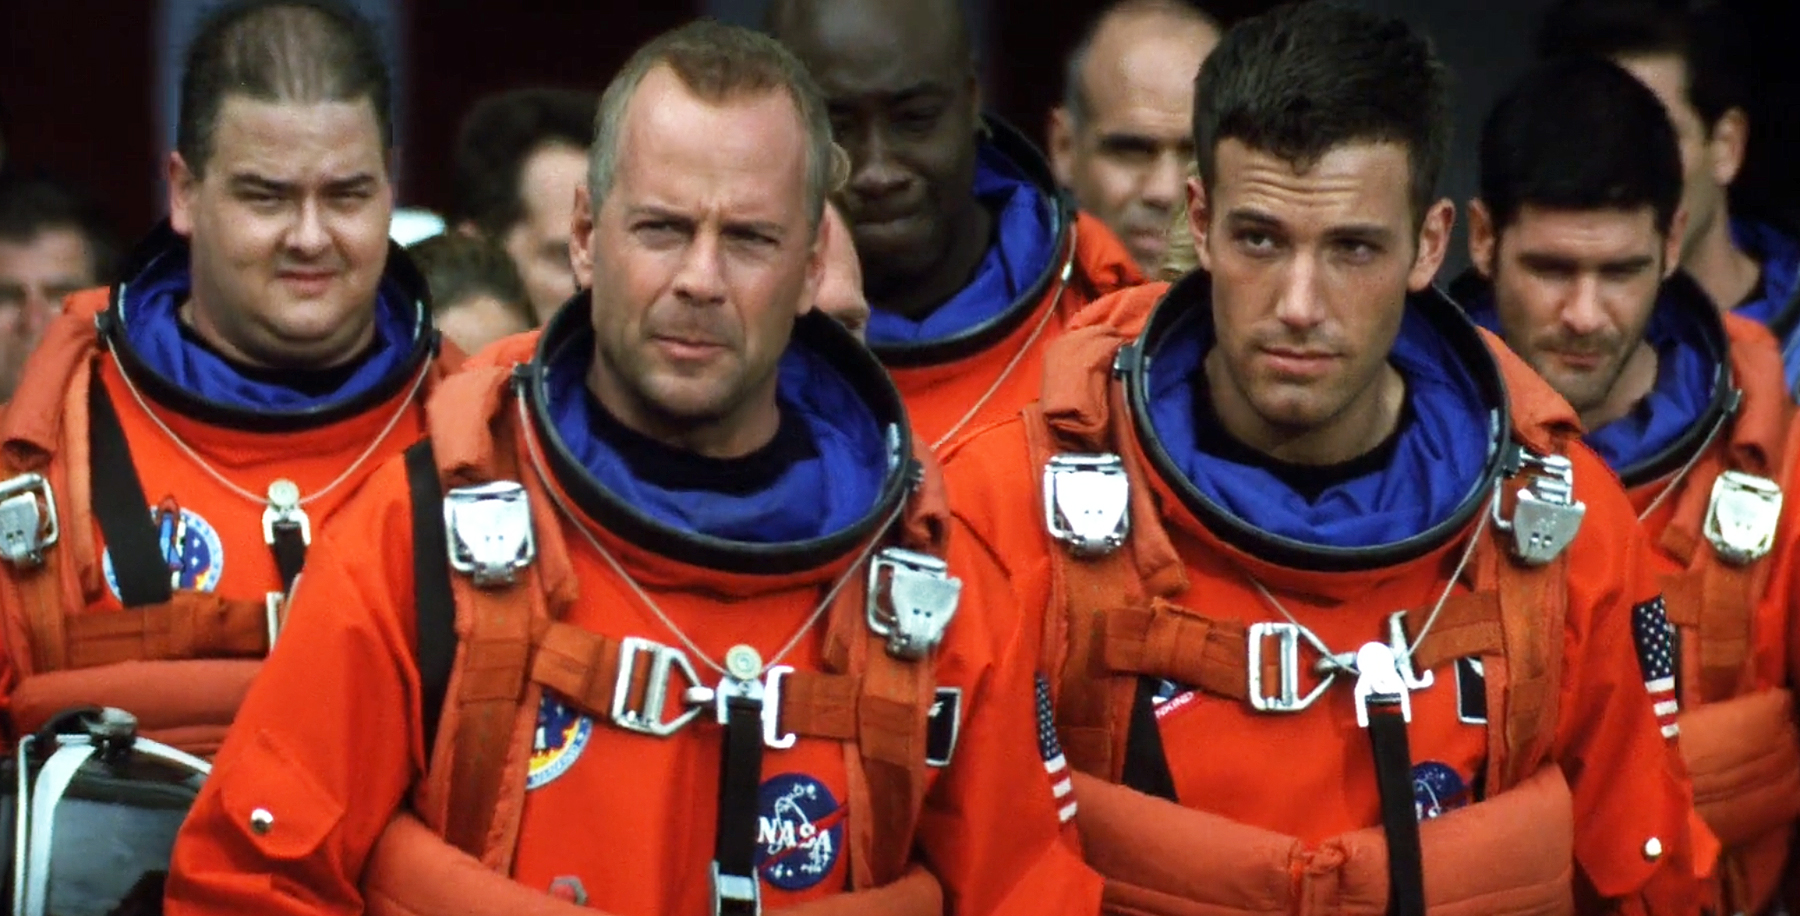 a group of astronauts from the movie Armageddon